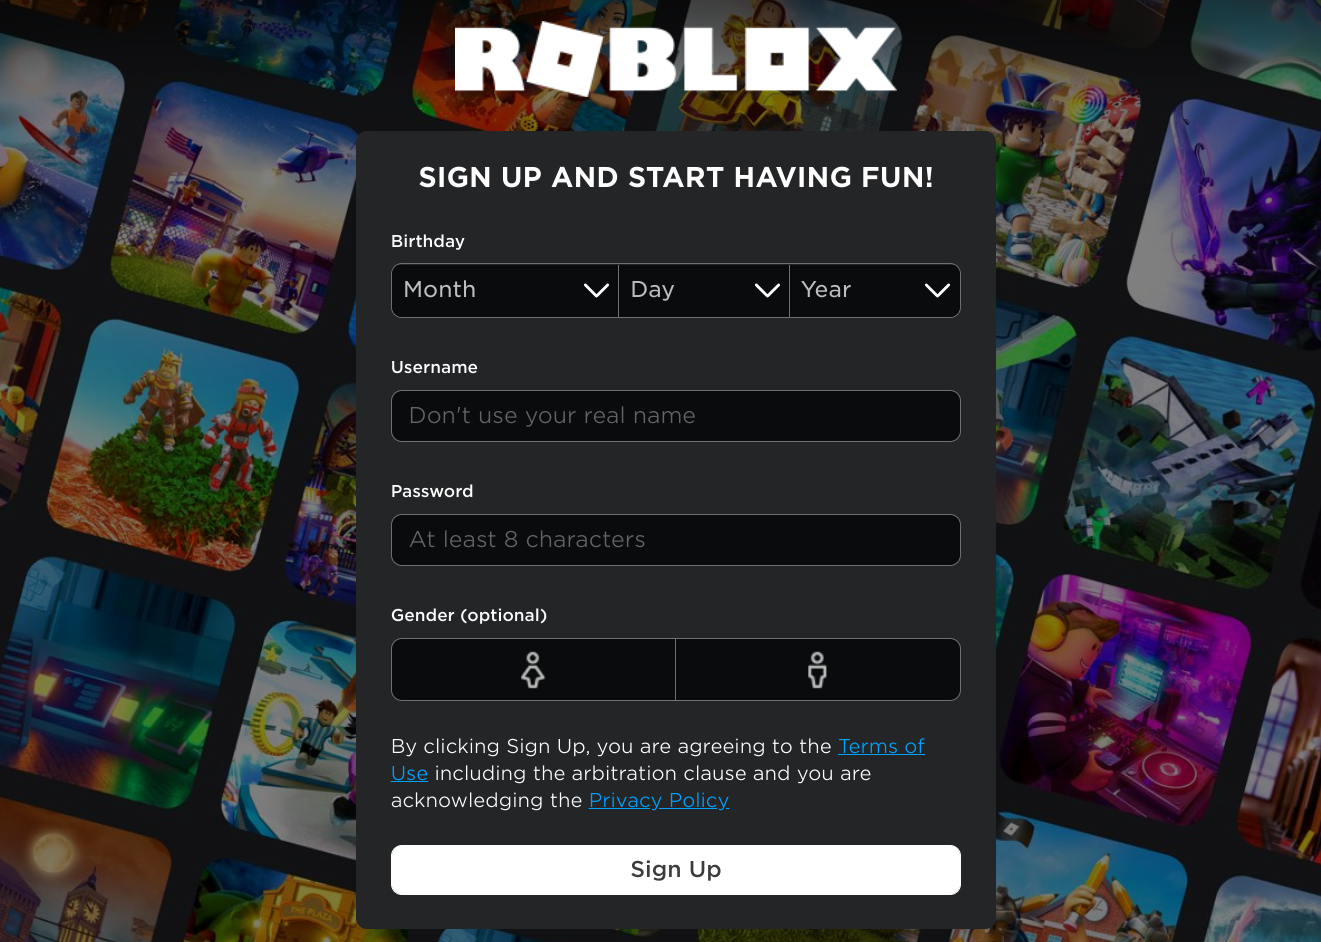 Roblox requires you to create an account before being able to access any creation tools. 